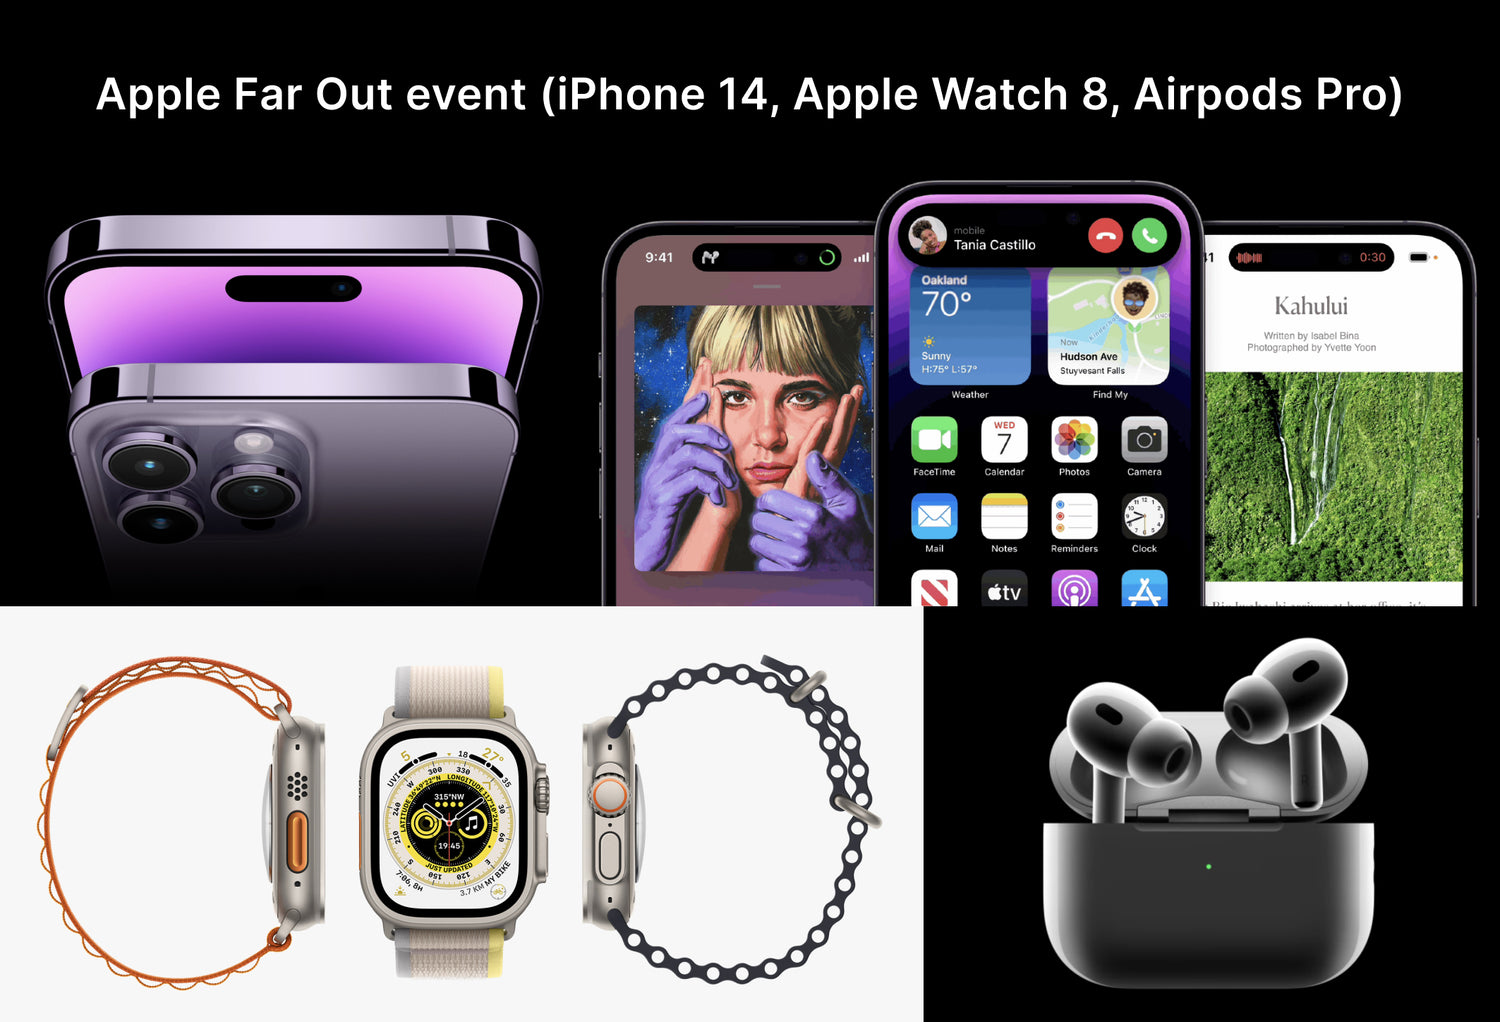 Apple Far Out event (iPhone 14, Apple Watch 8, Airpods Pro)